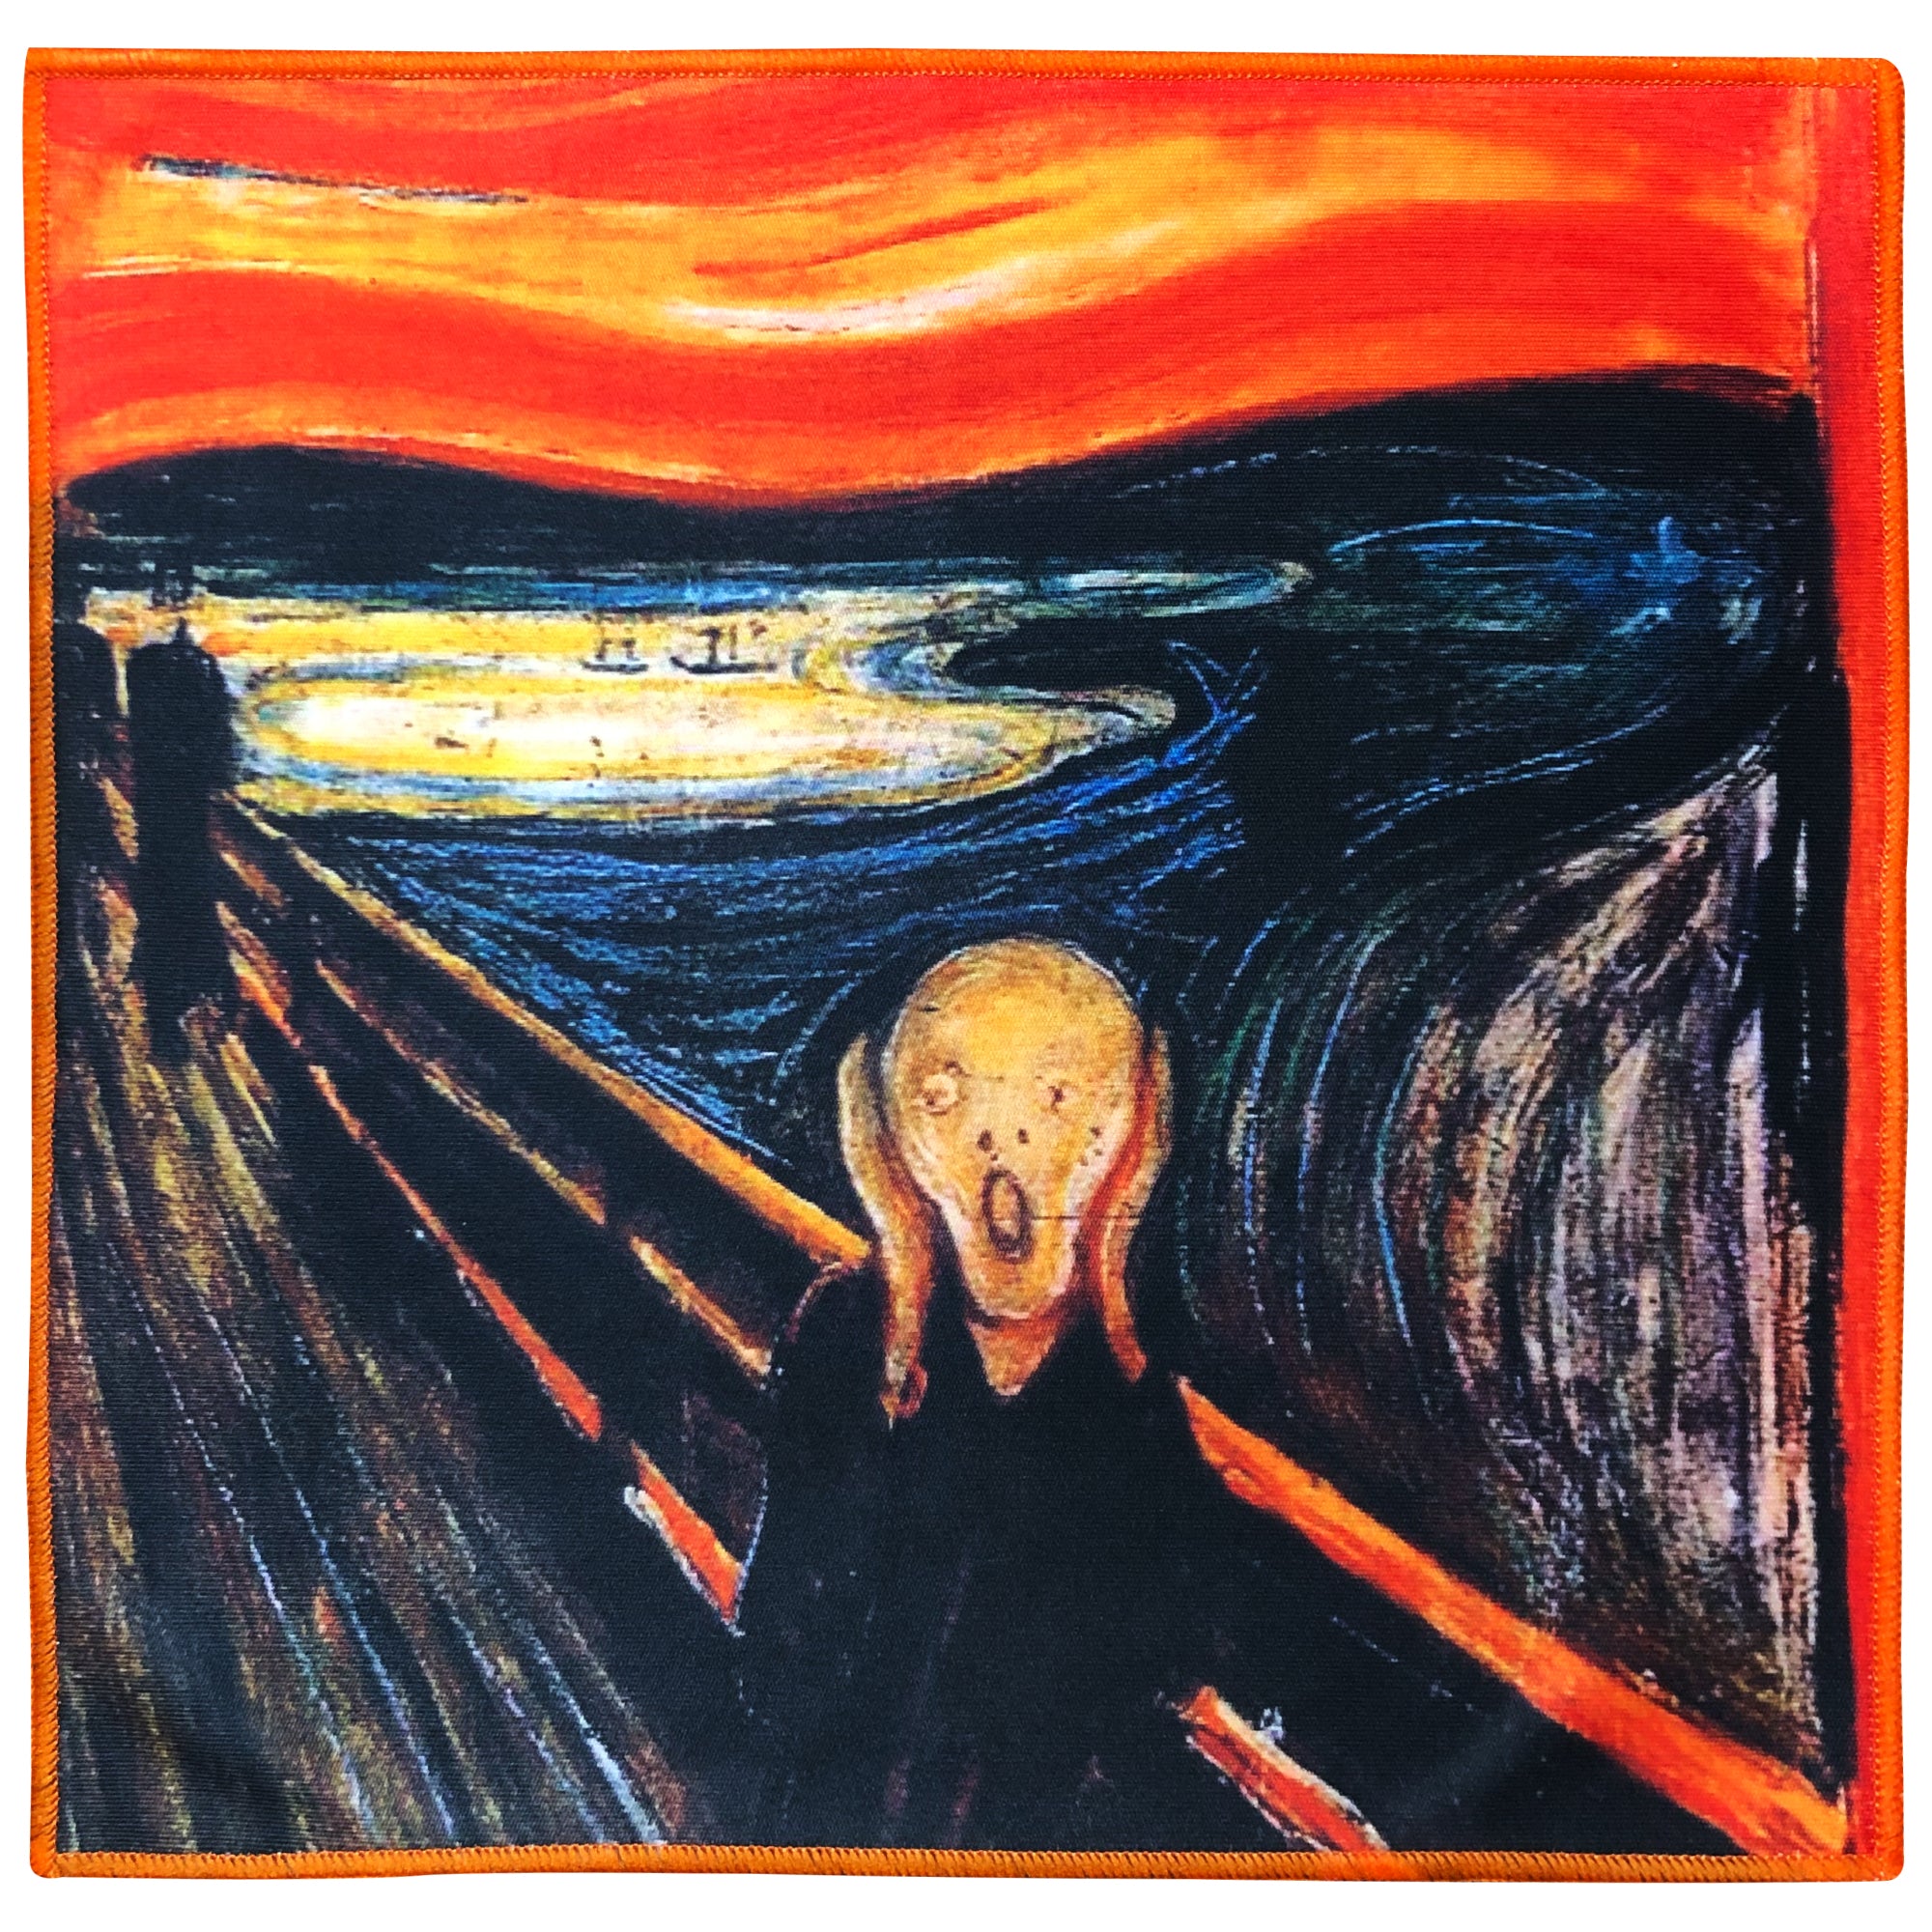 [6 Pack] Edvard Munch "The Scream" - Art Collection - Ultra Premium Quality Microfiber Cleaning Cloths